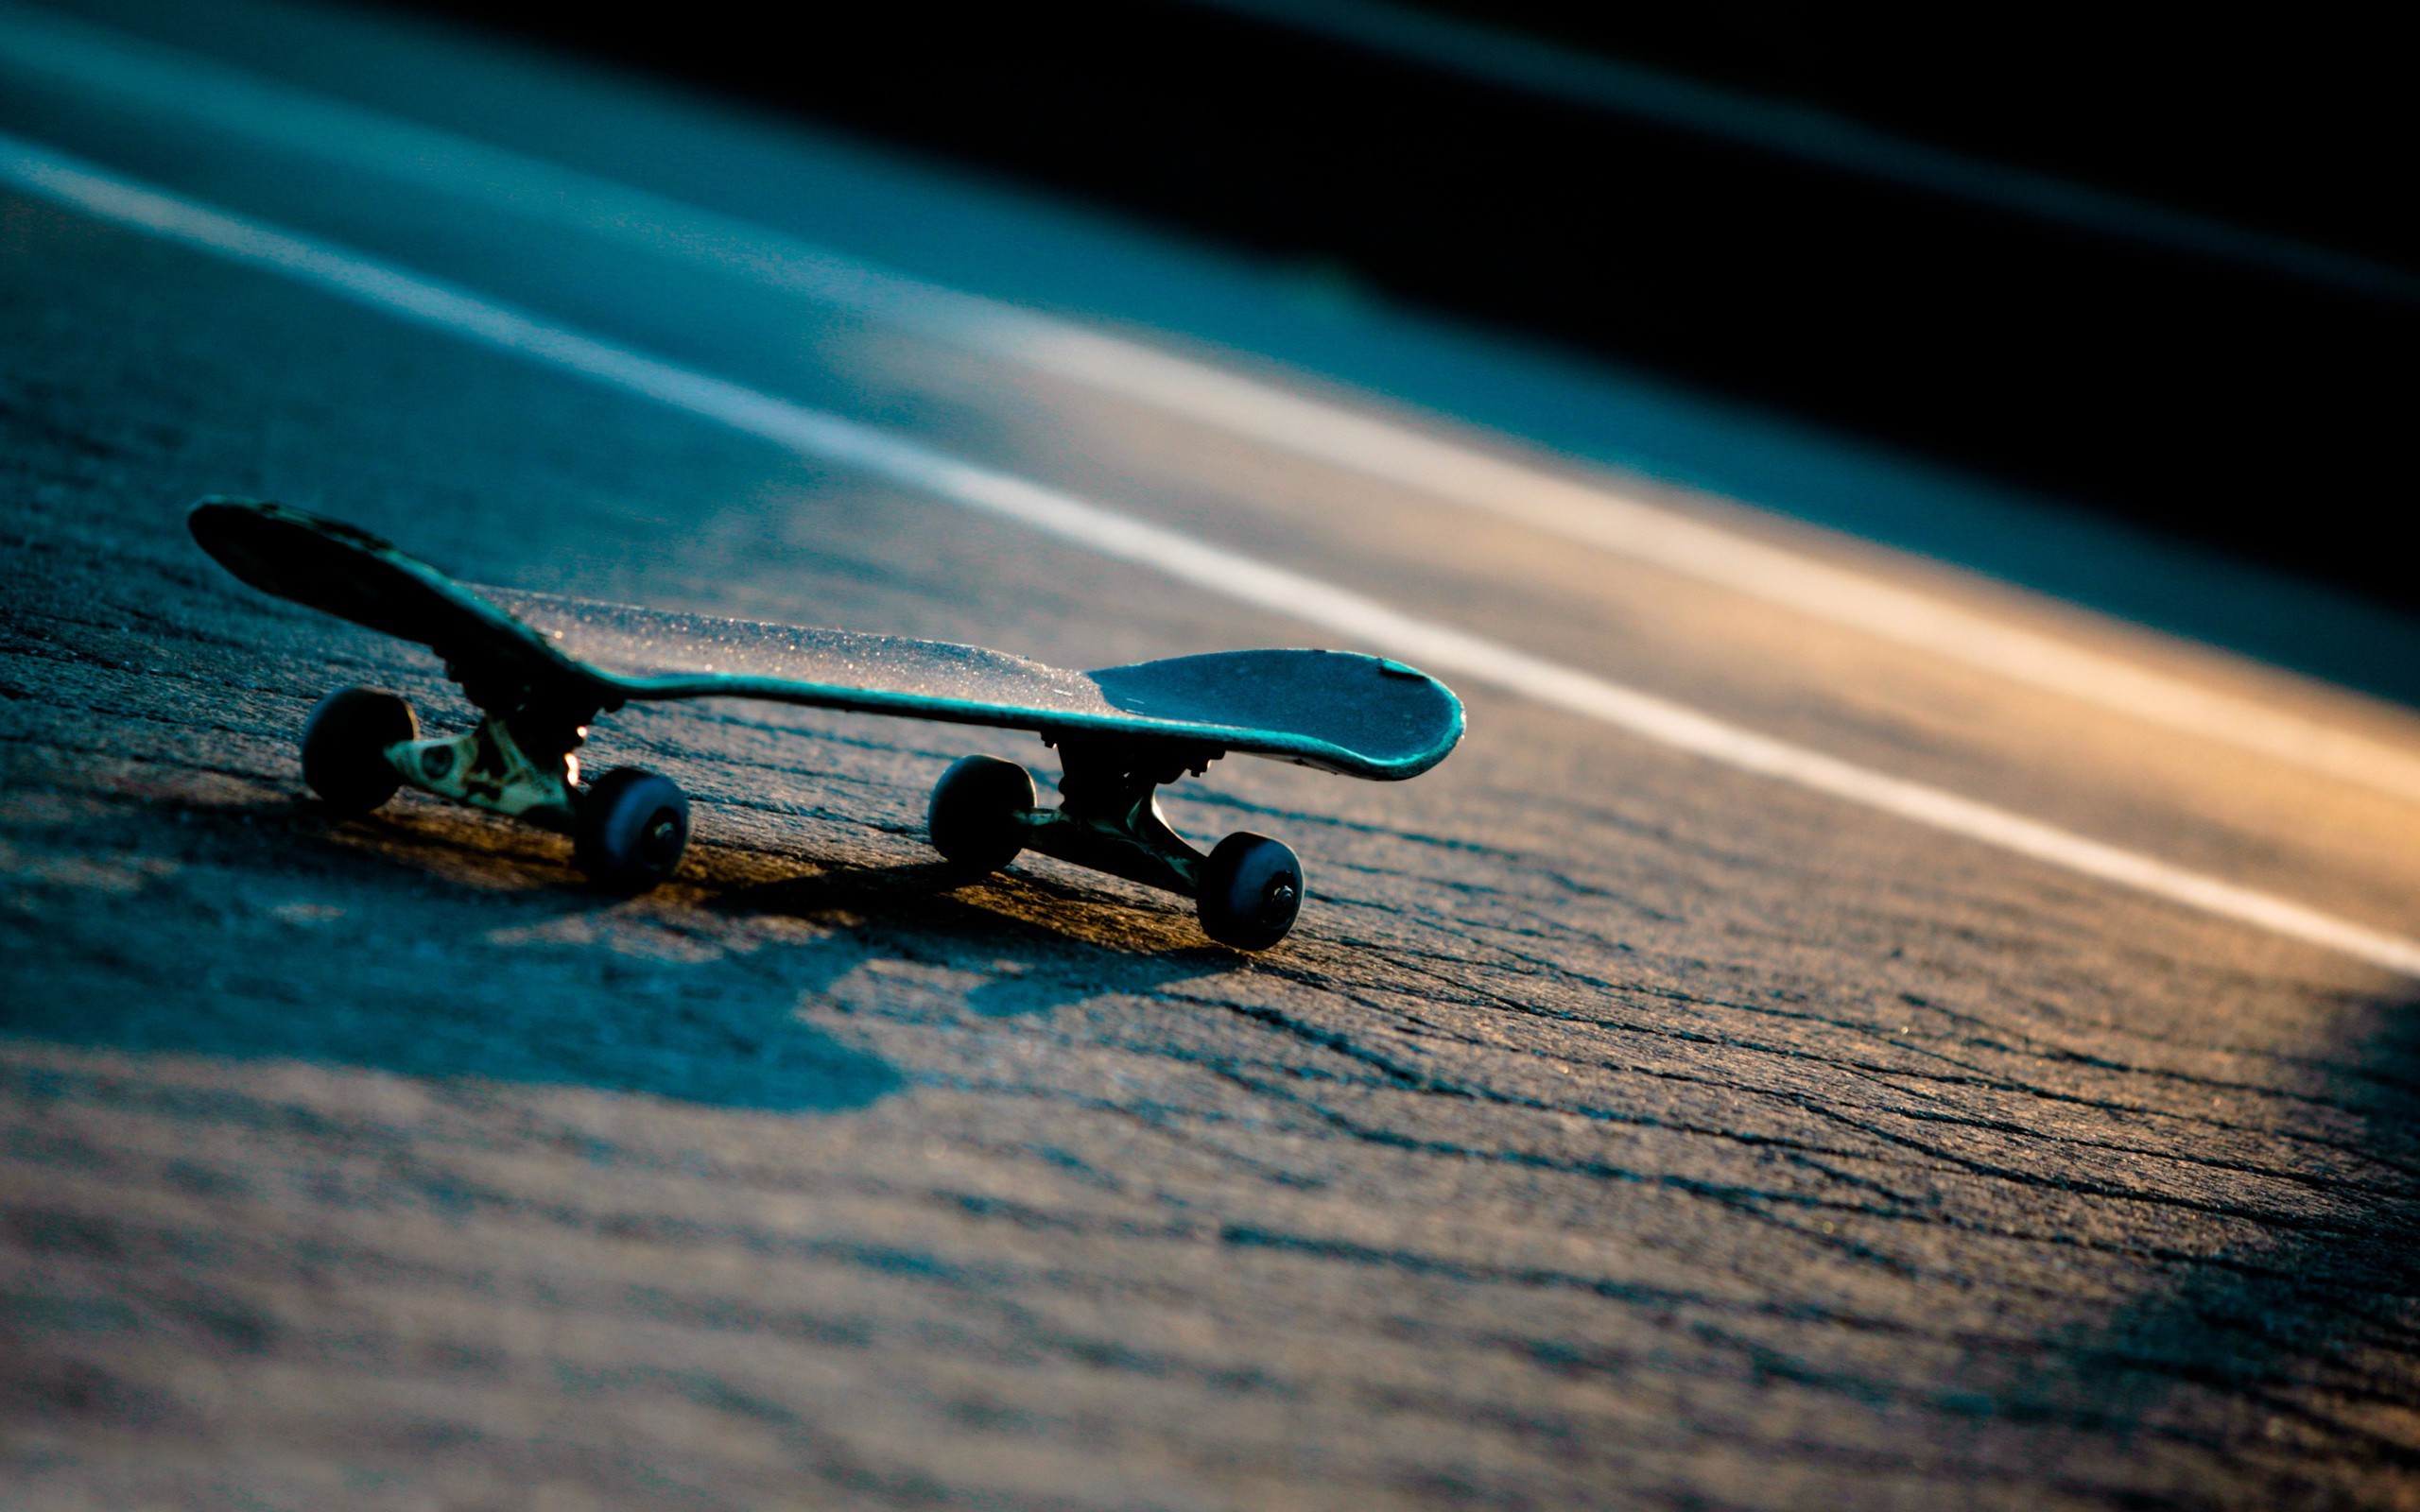 2560x1600 Skateboard Pictures For Desktop Wallpaper 2560 x 1600 px 1.2 MB jumping  heart iphone cute purple